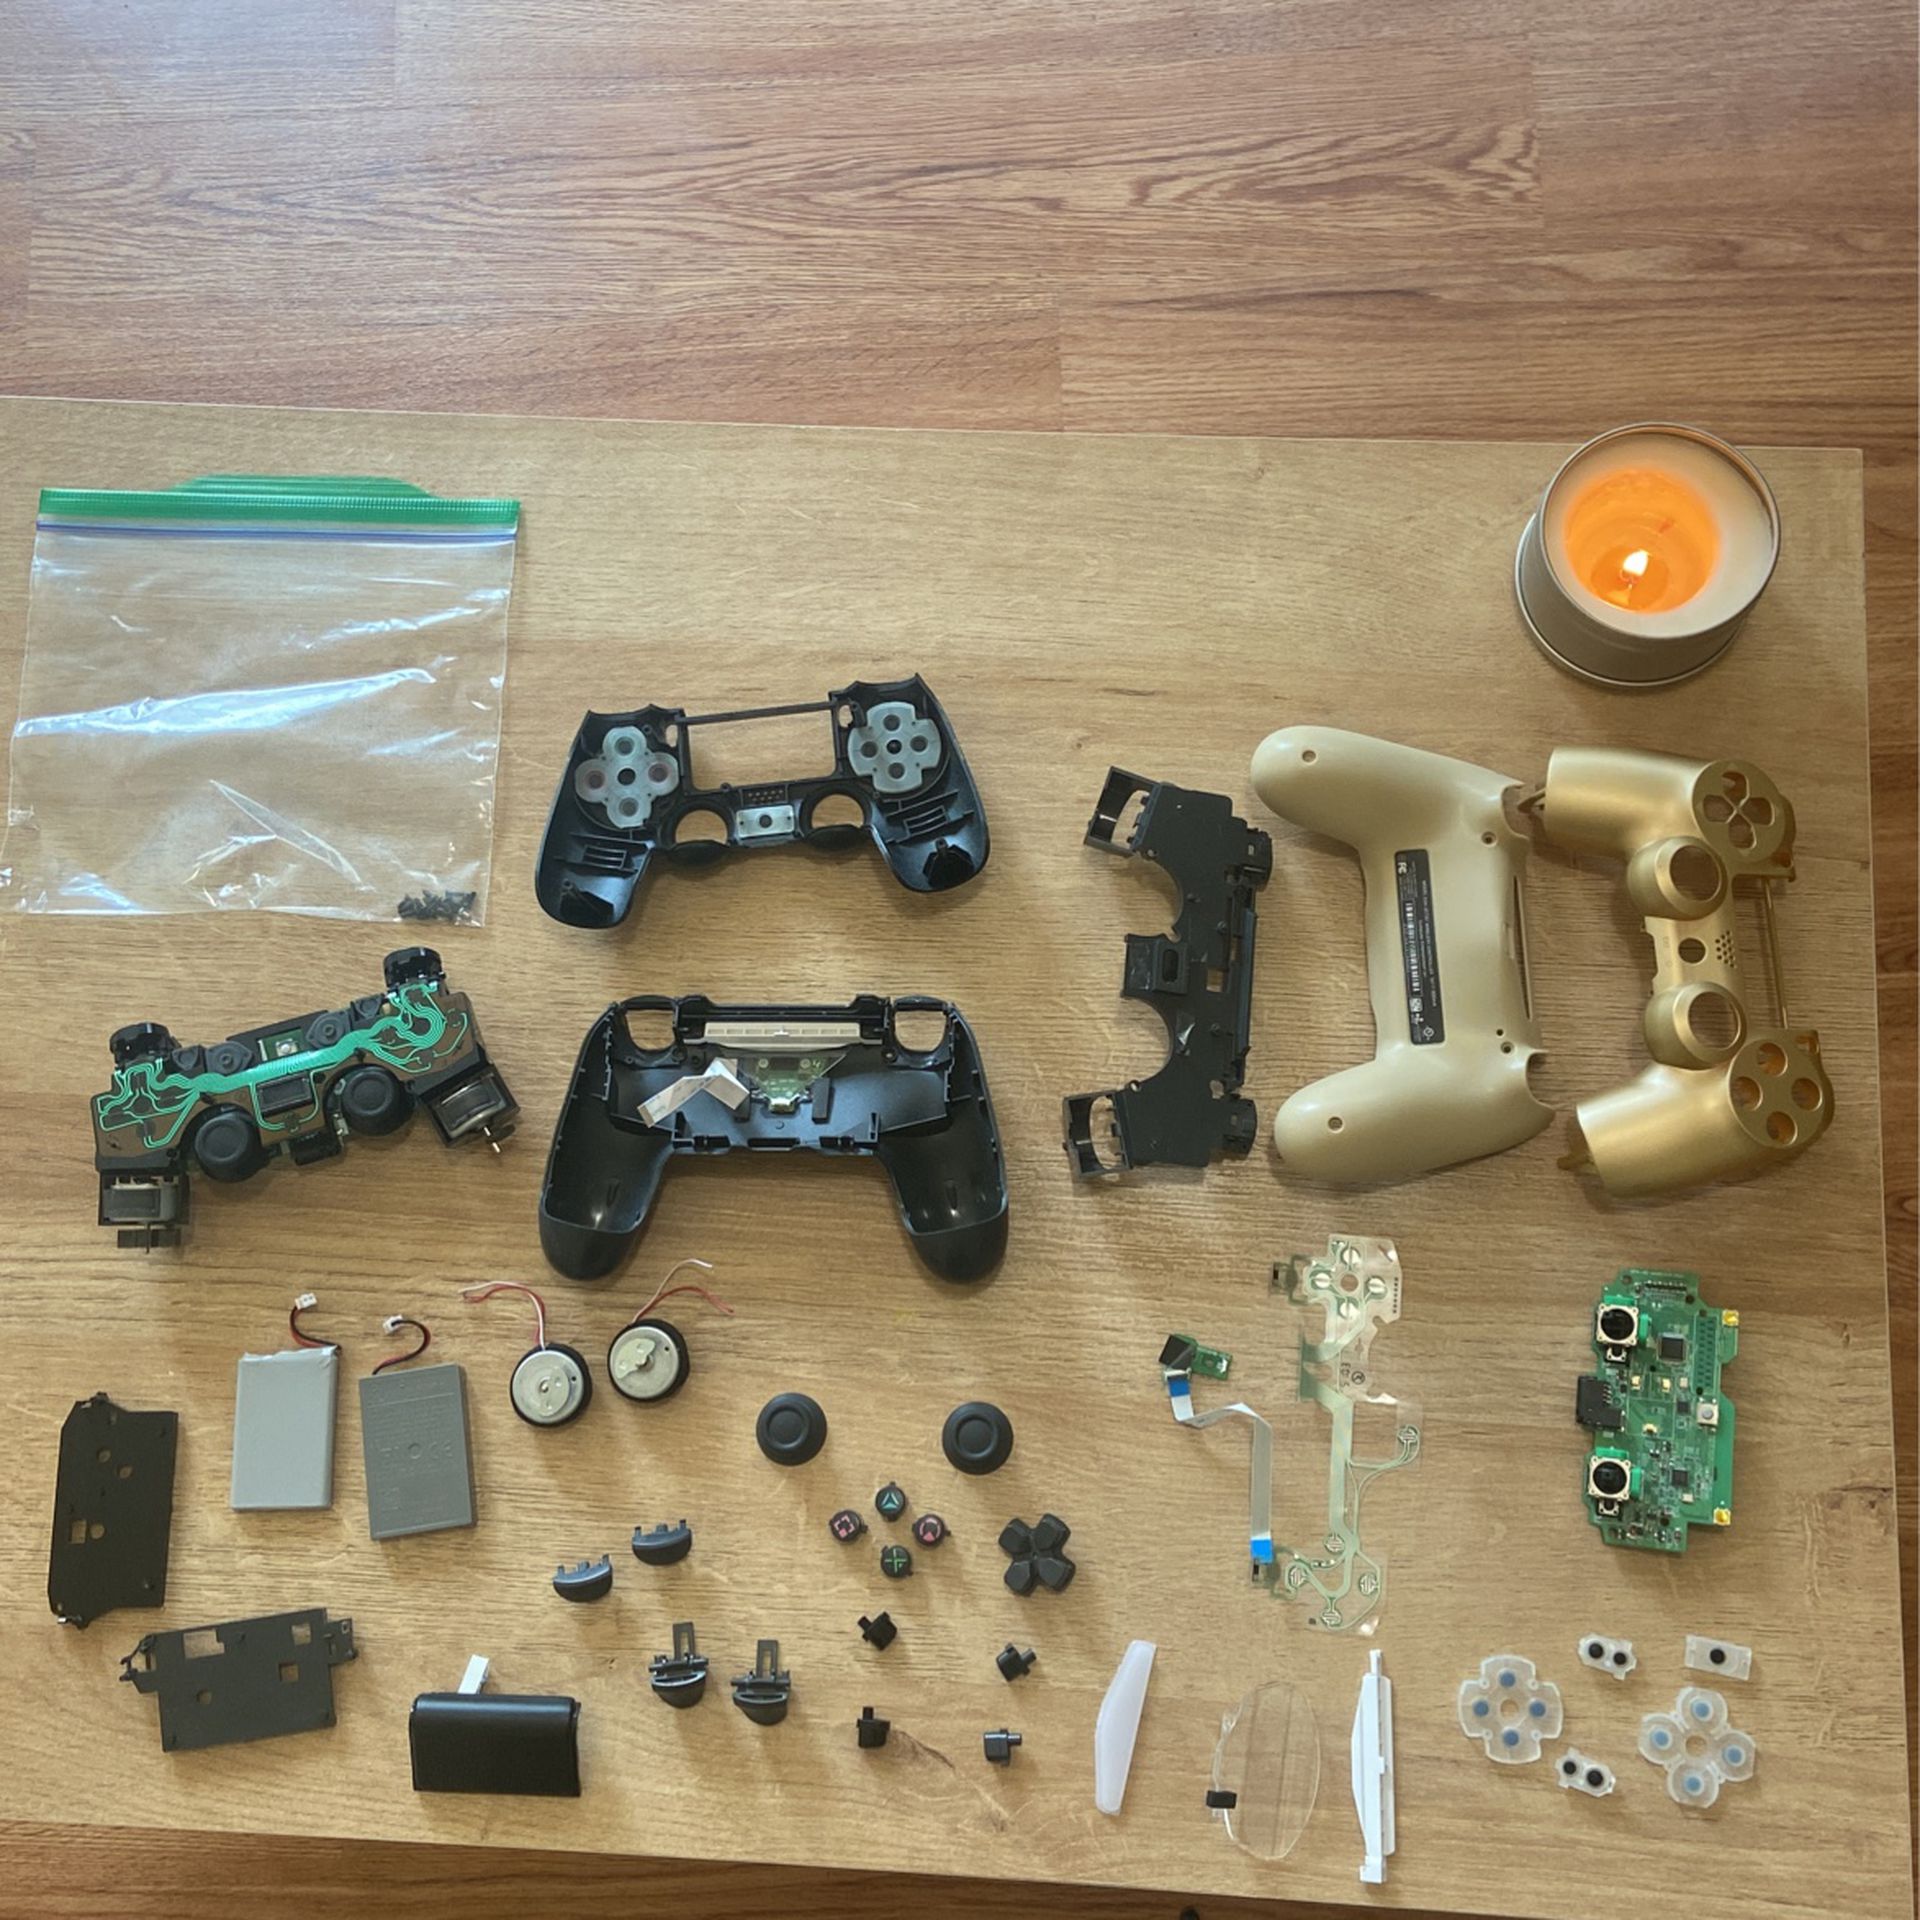 Disassembled Ps4 Controller Broken Ps4 Controller. Parts. for Sale in North IL - OfferUp